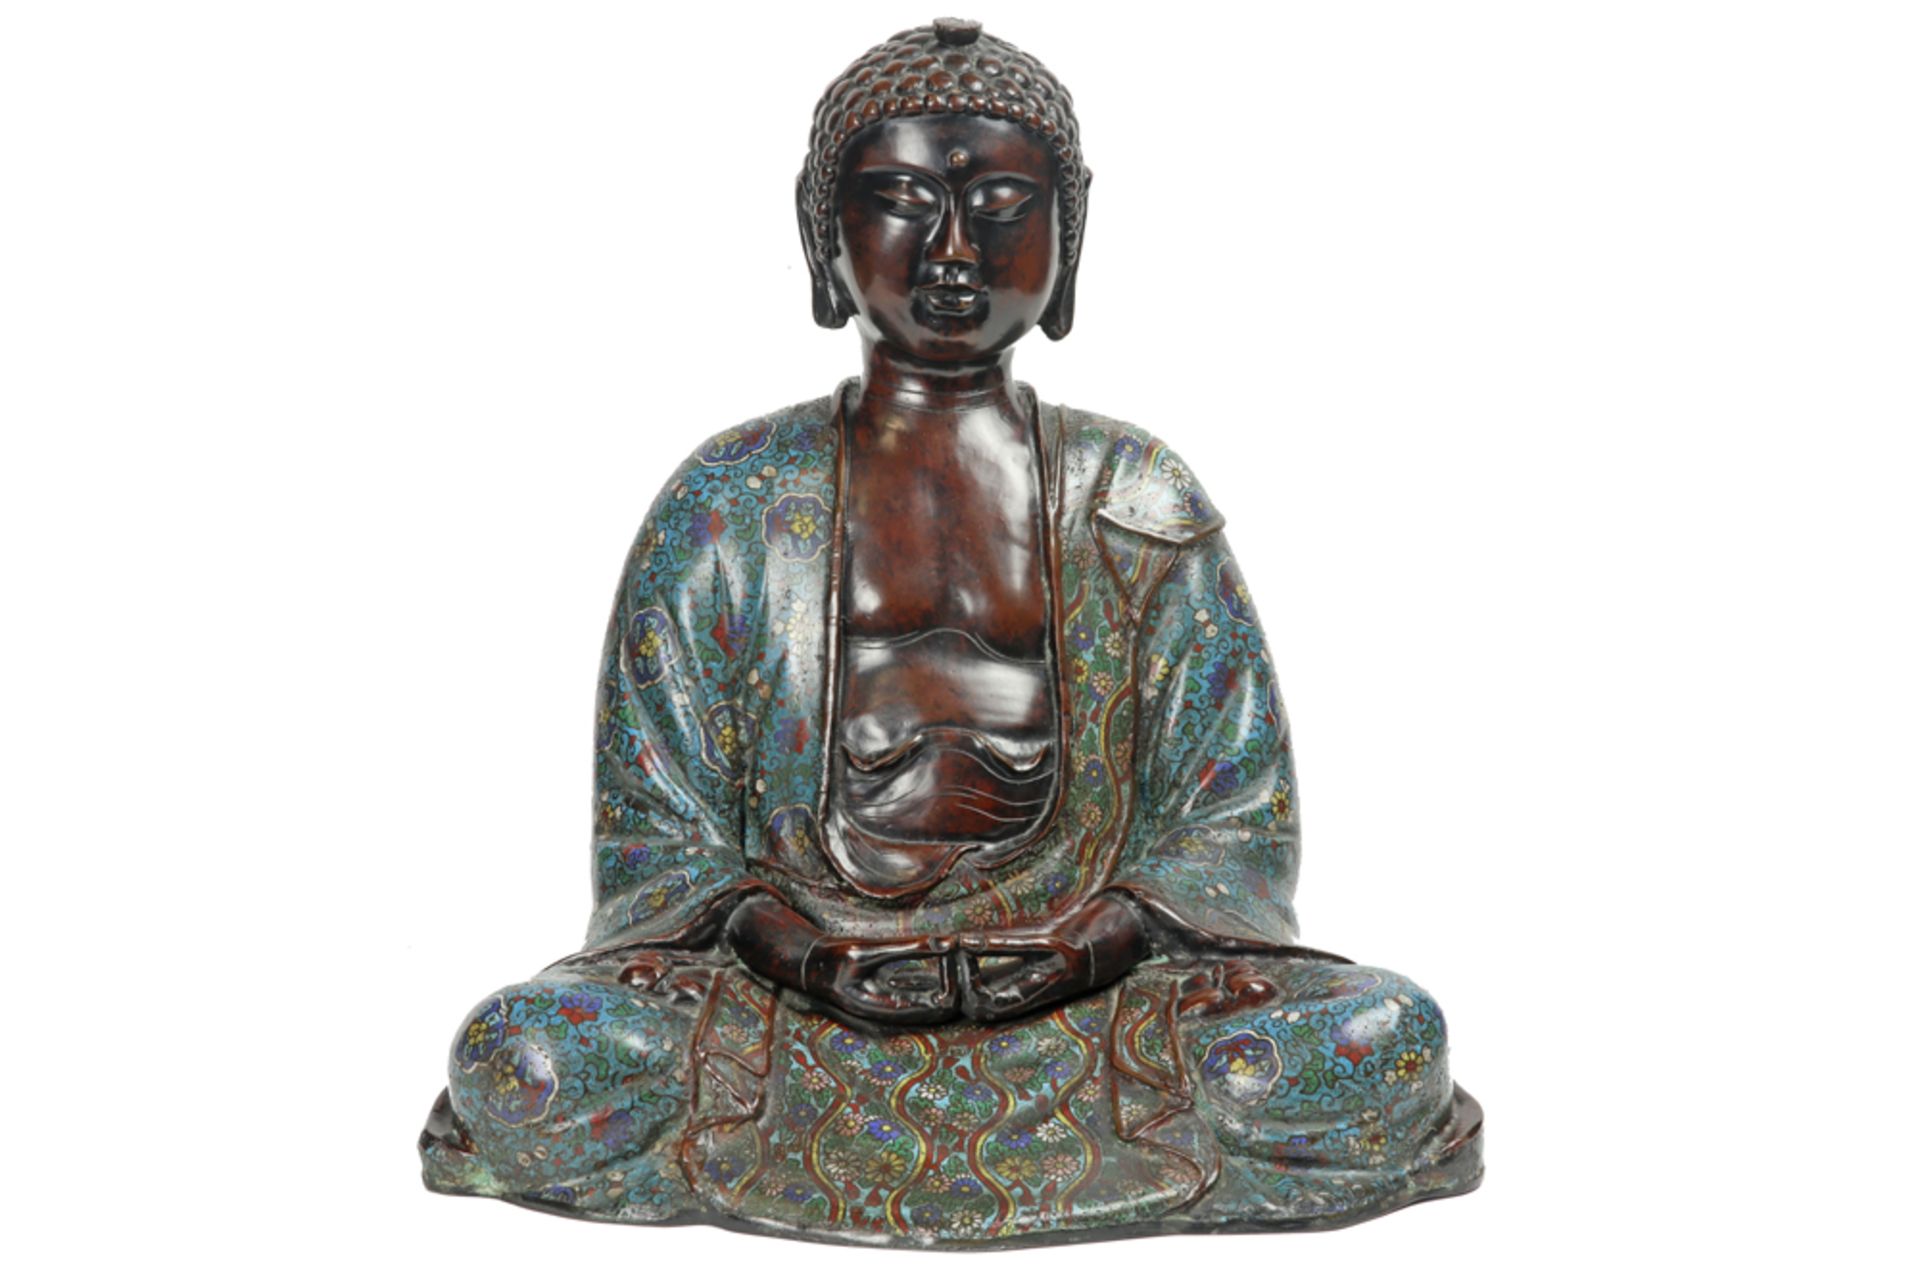 antique presumably Japanese 18th Cent. (Edo period) "Meditating Buddha" sculpture in bronze and